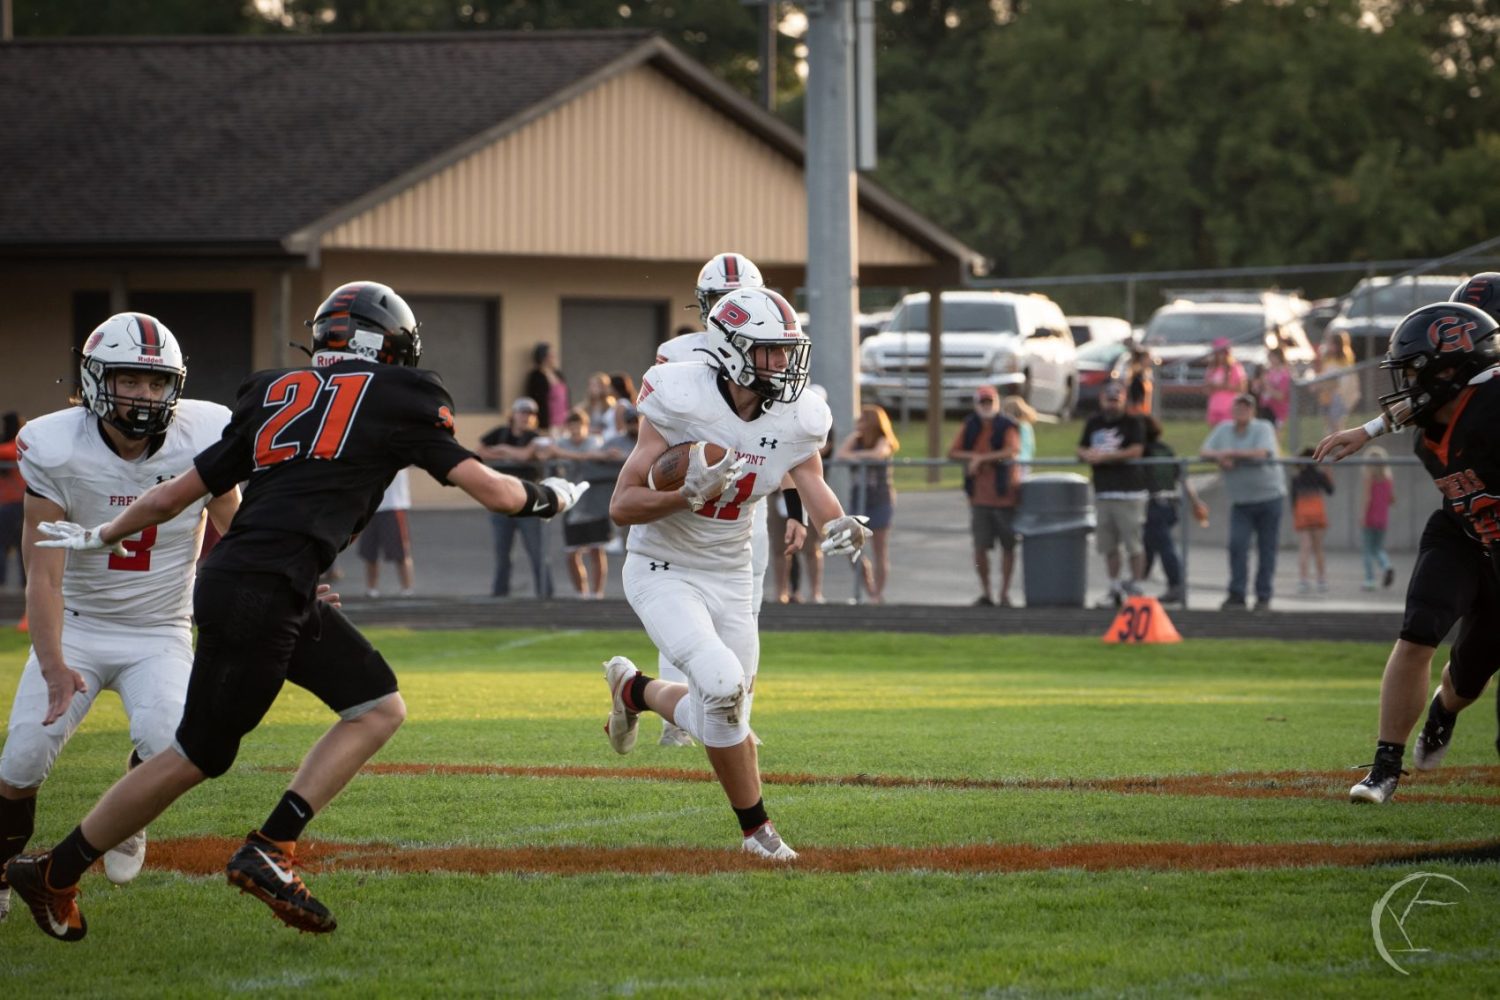 Dirheimer rushes for 296 yards in Fremont’s rout of Grant, 30-8